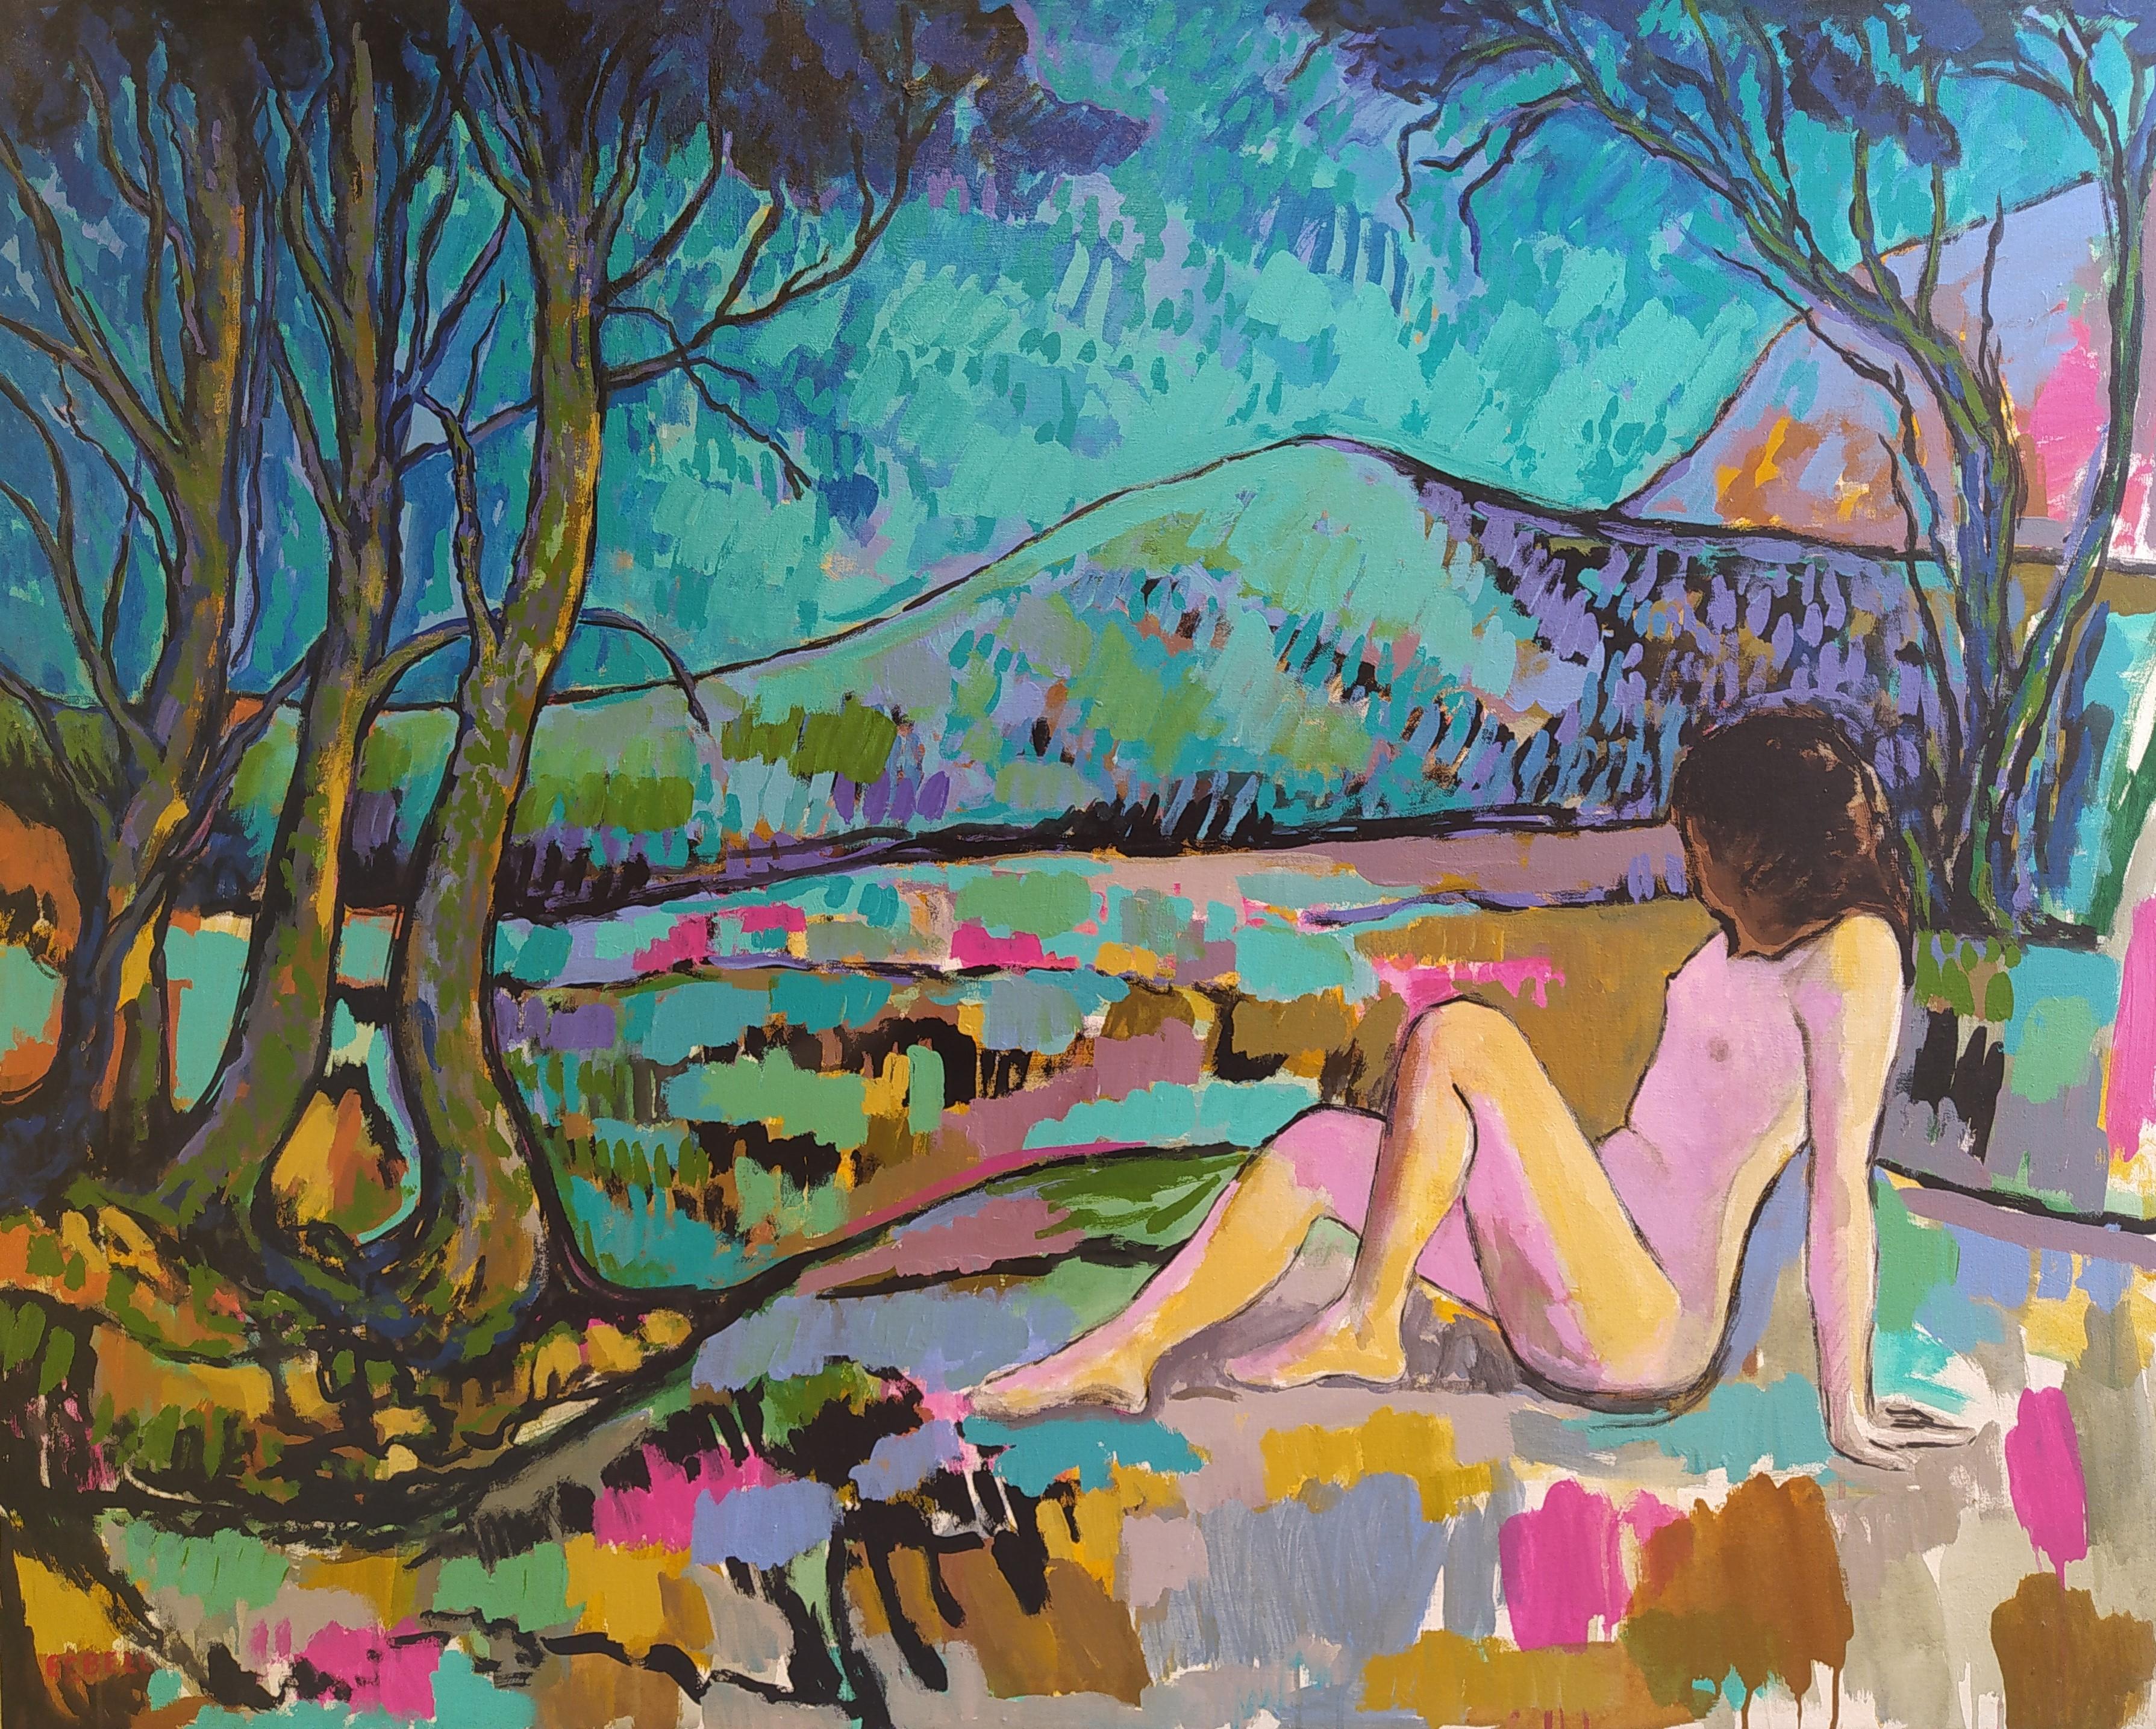 E.C. Bell Nude Painting - "Landscape with Nude" - Colorful horizontal expressionist landscape with nude.